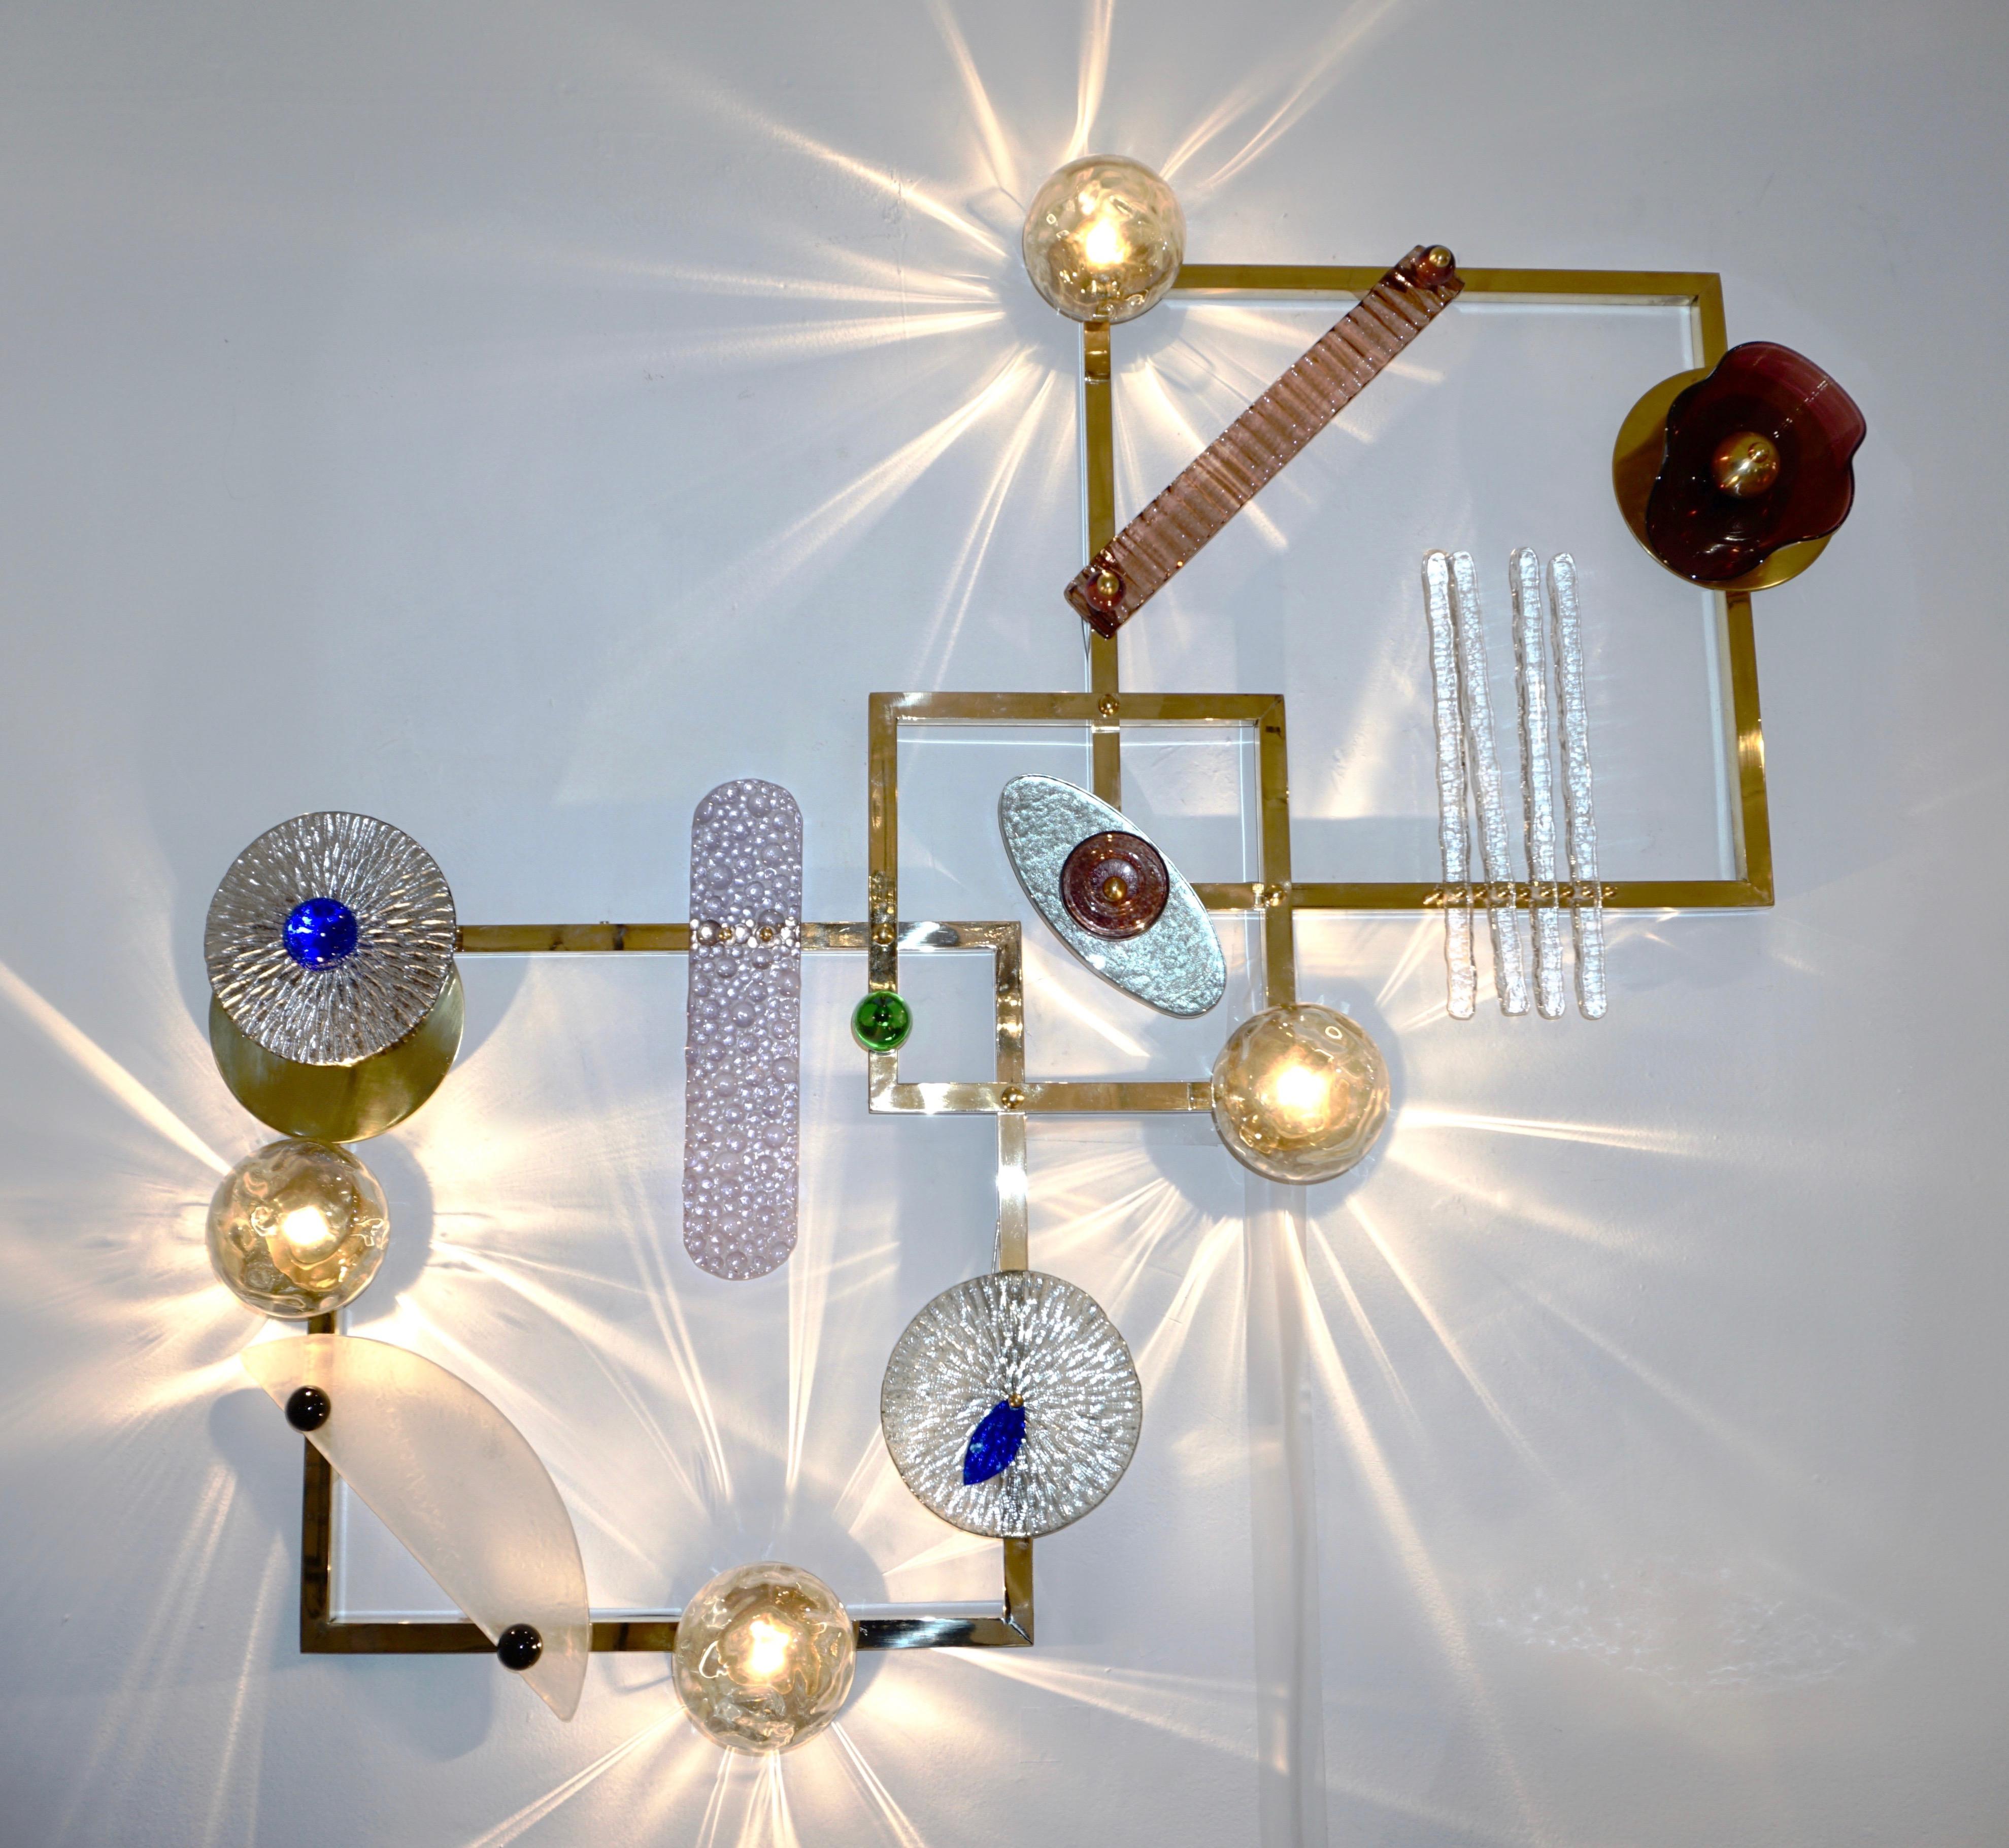 An exclusive illuminating Work of Art, wall light and art sculpture, entirely handcrafted in Italy, of geometric organic design, consisting of 2 square brass frames diagonally linked by a smaller one, decorated by hand made brass and Murano glass